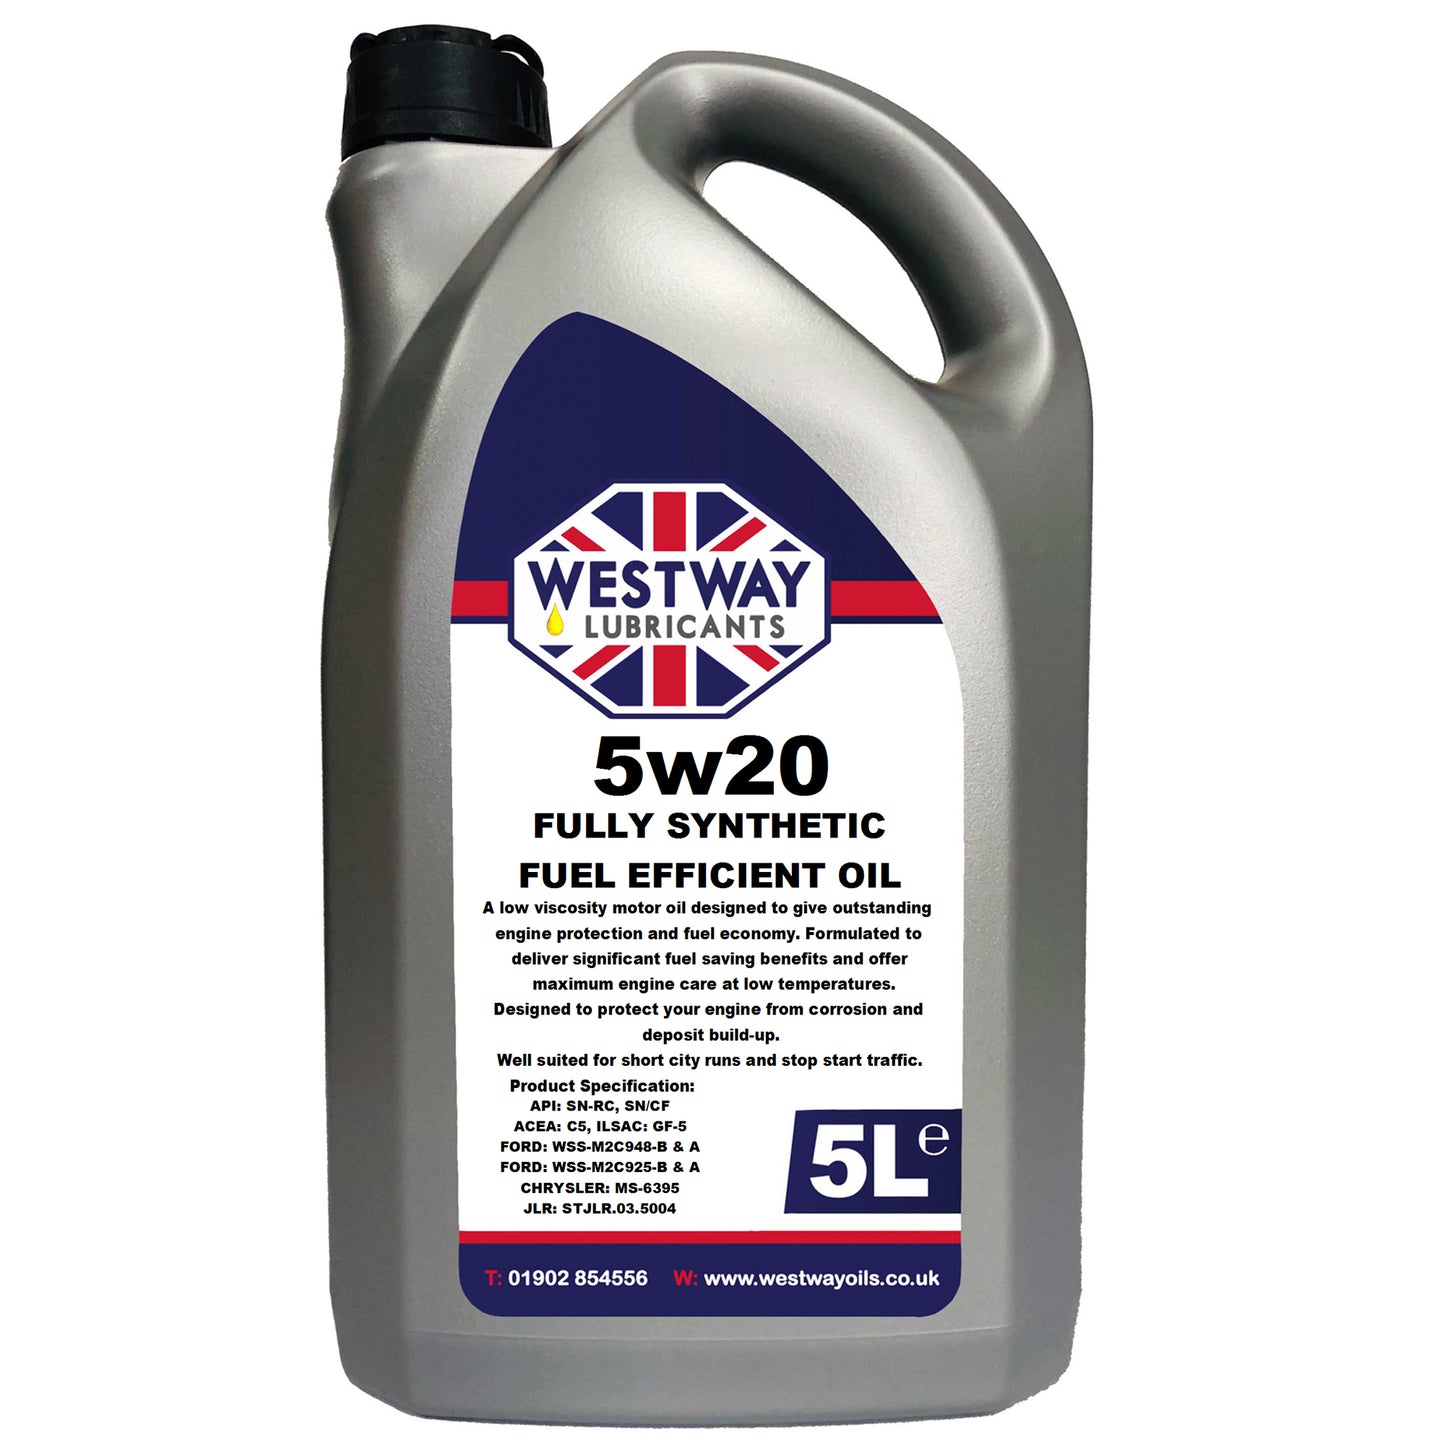 5W20 EcoBoost Synthetic Engine Oil Meets Ford WSS-M2C948-B Specification